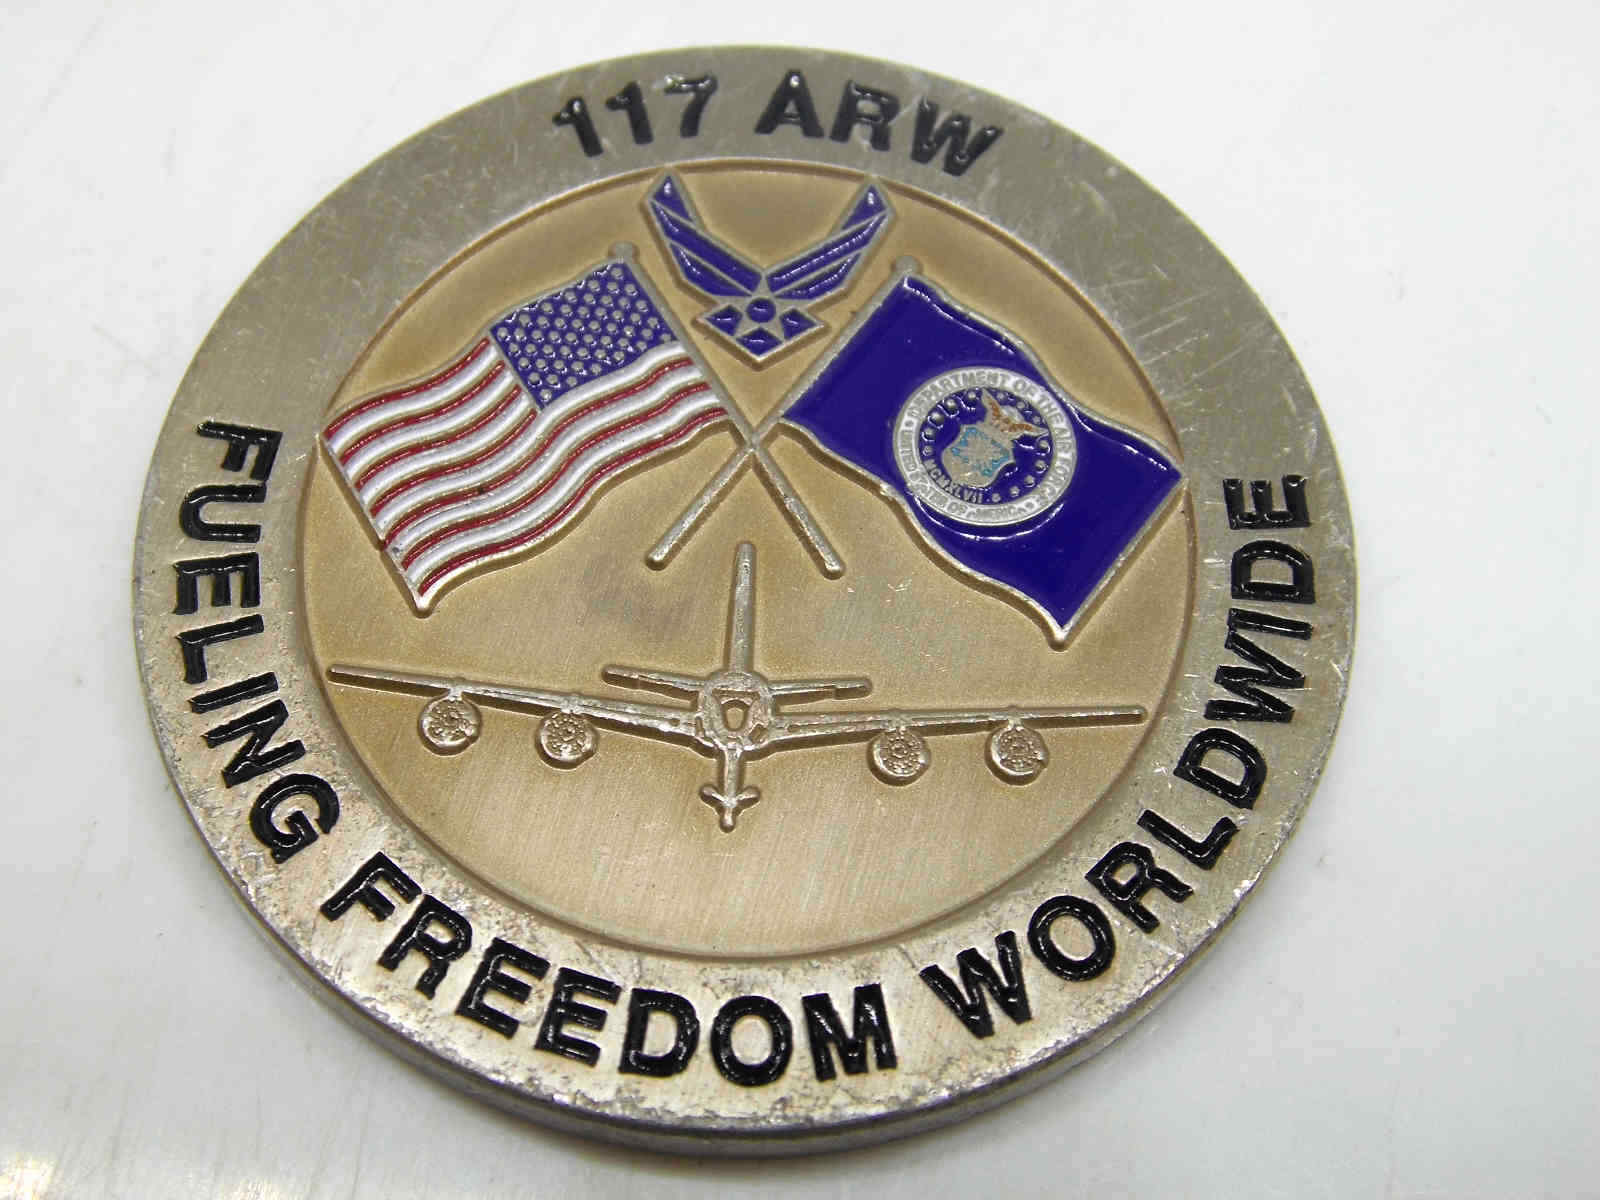 117 ARW FUELING FREEDOM WORLDWIDE 117TH AIR REFUELING WING CHALLENGE COIN